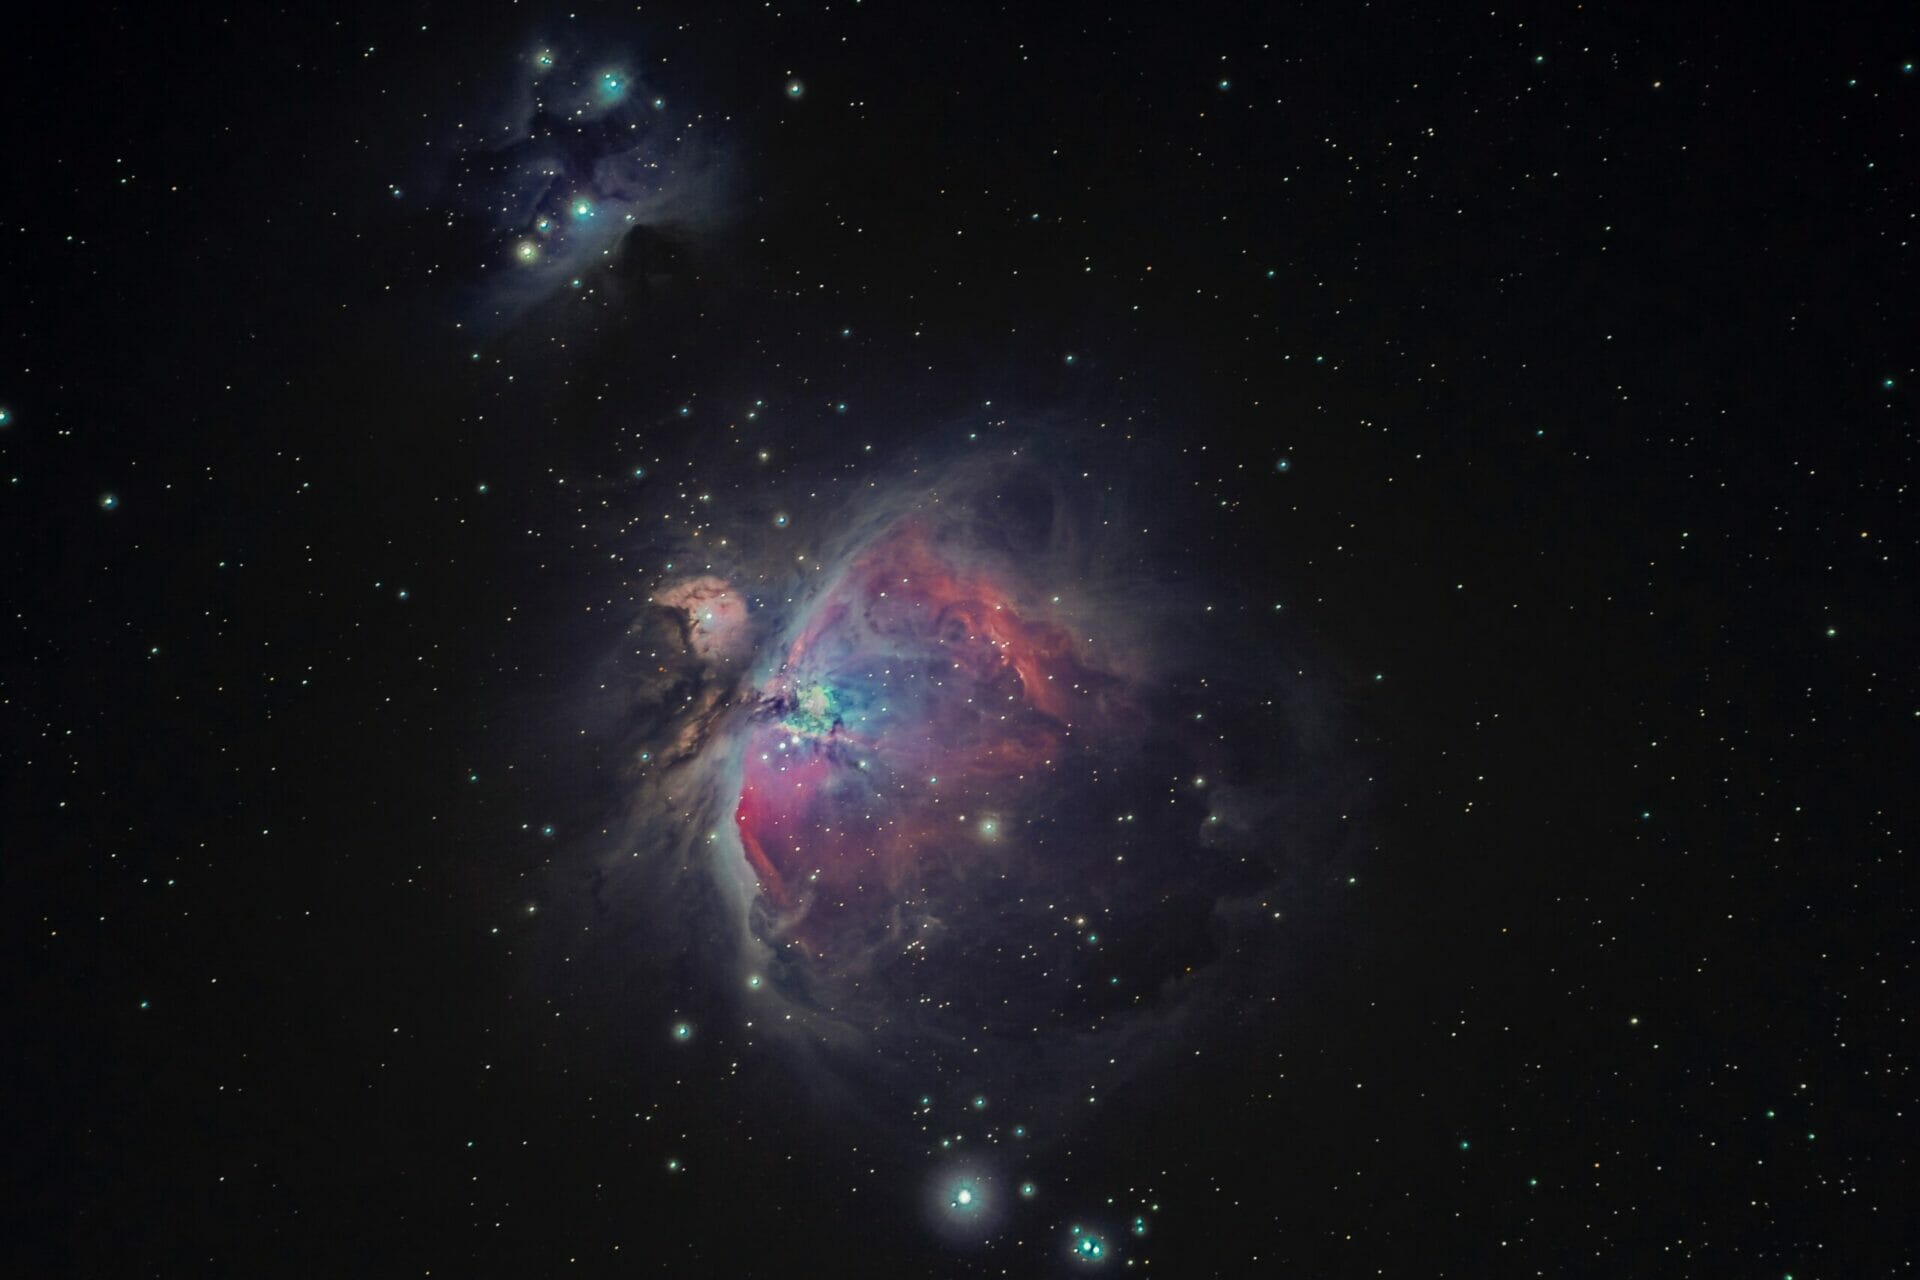 Seven Brief Lessons on Physics - A photo of the Orion Nebula was taken in s backyard in Petaluma, California.